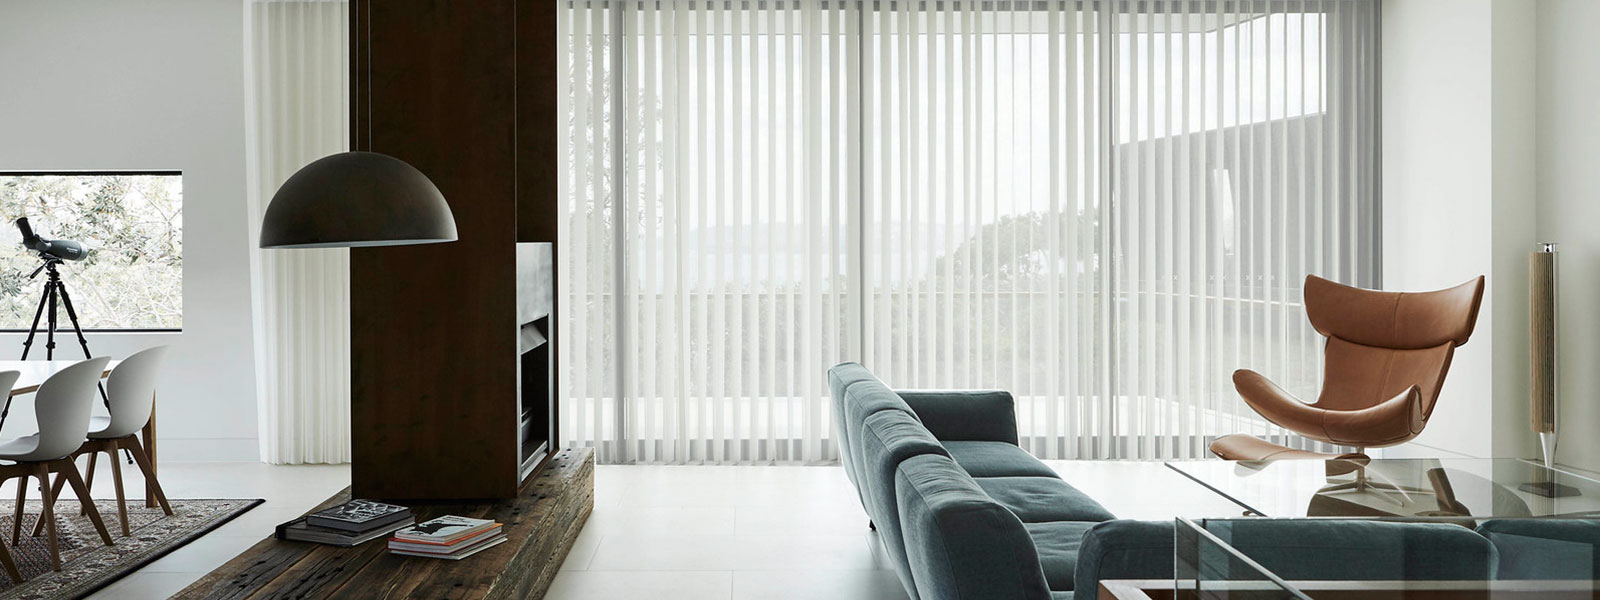 Veri Shades and Blinds